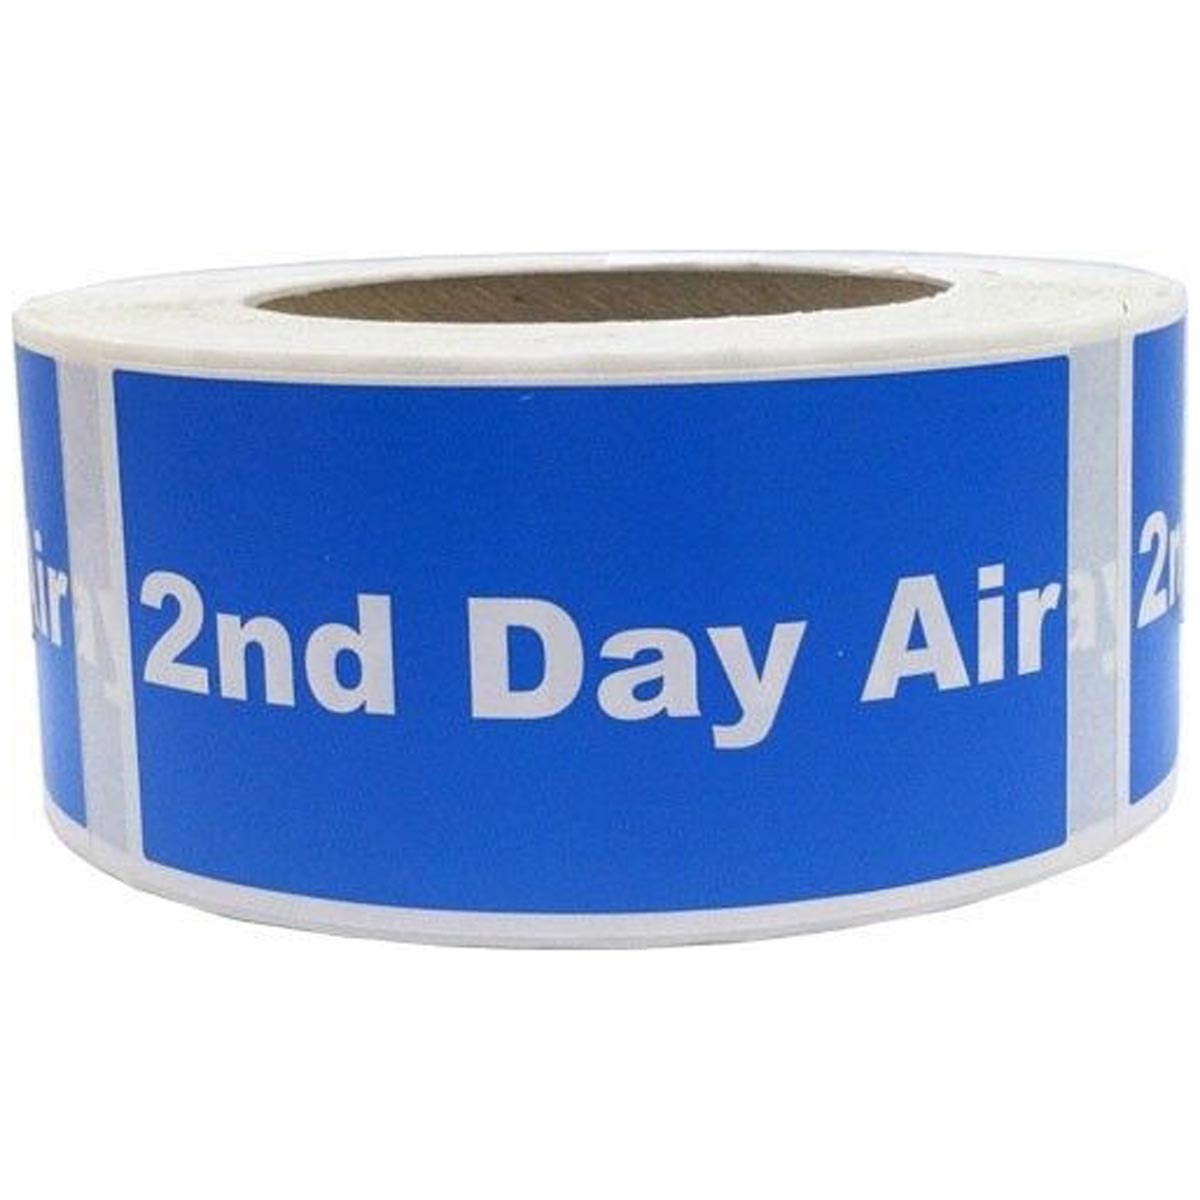 Second Day Air Shipping Labels 2 x 4"